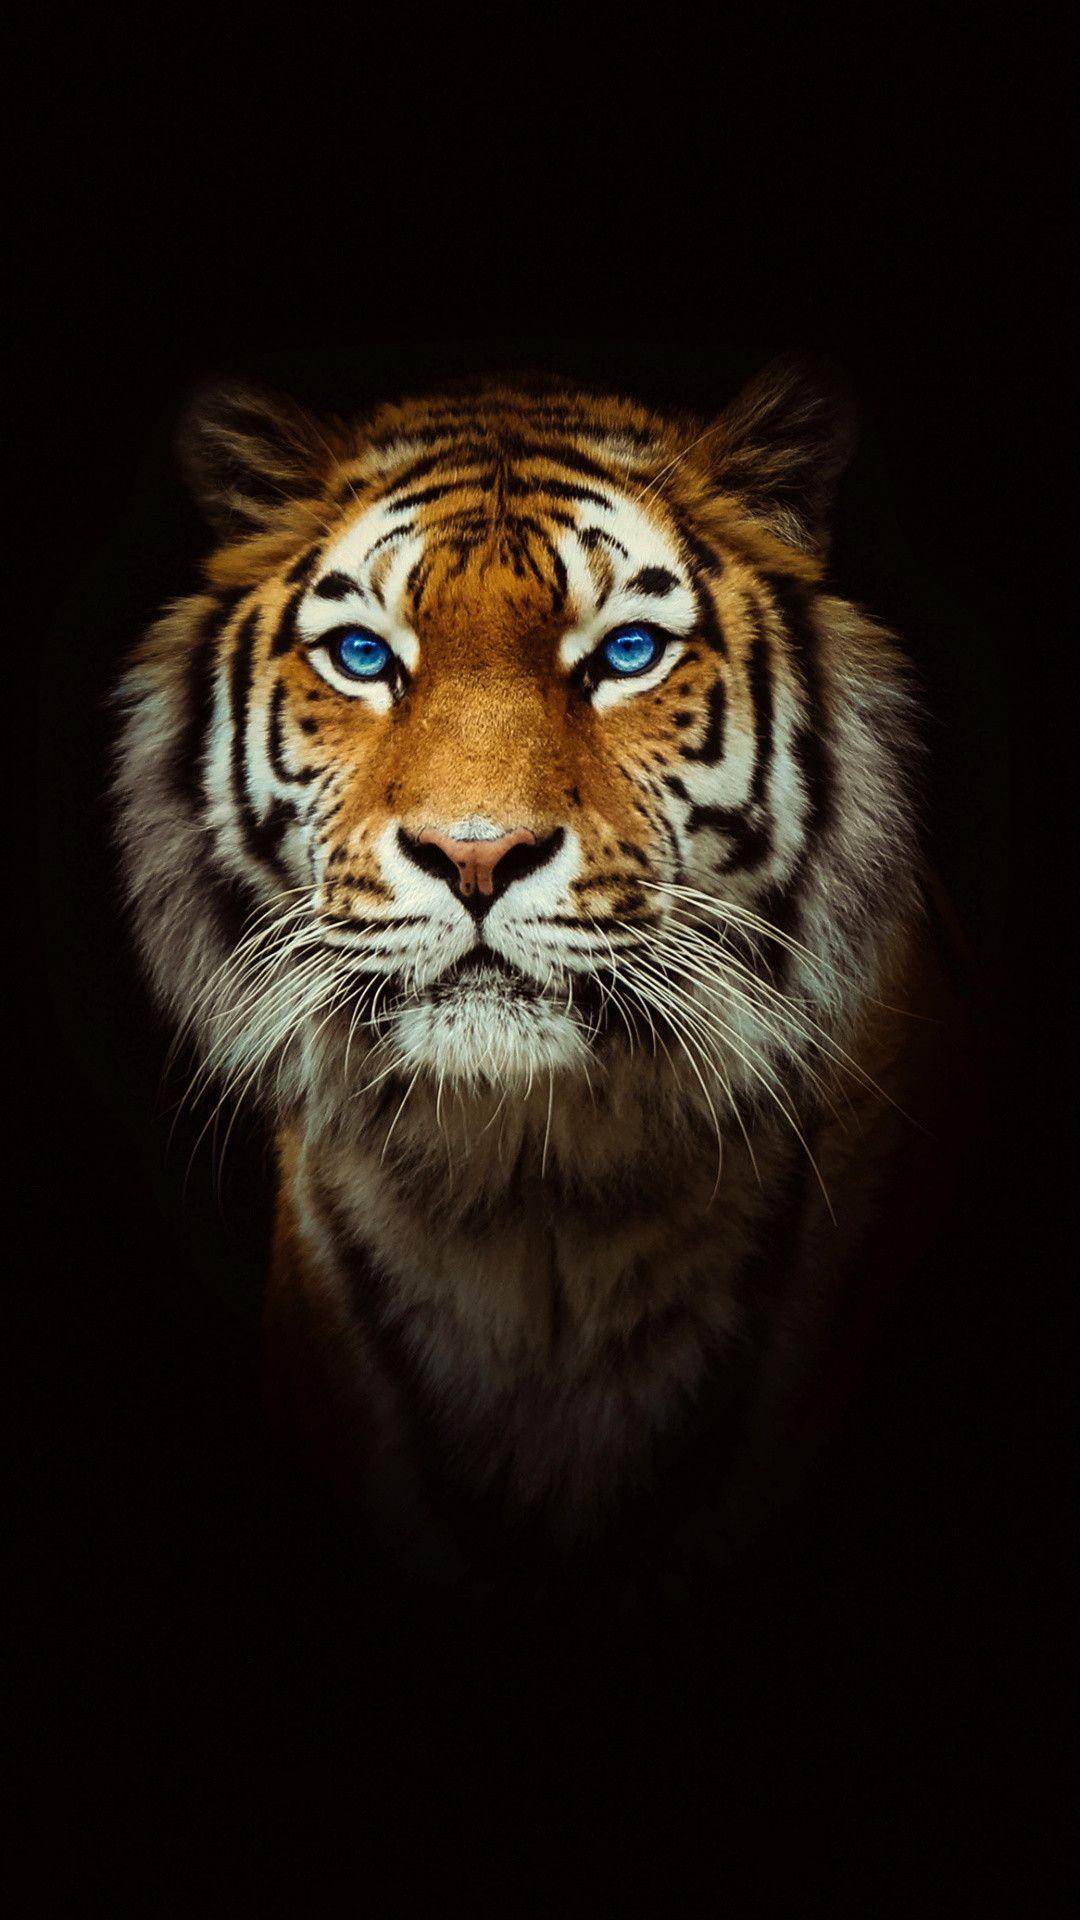 Tiger Iphone Hd Wallpapers Top Free Tiger Iphone Hd Backgrounds Wallpaperaccess